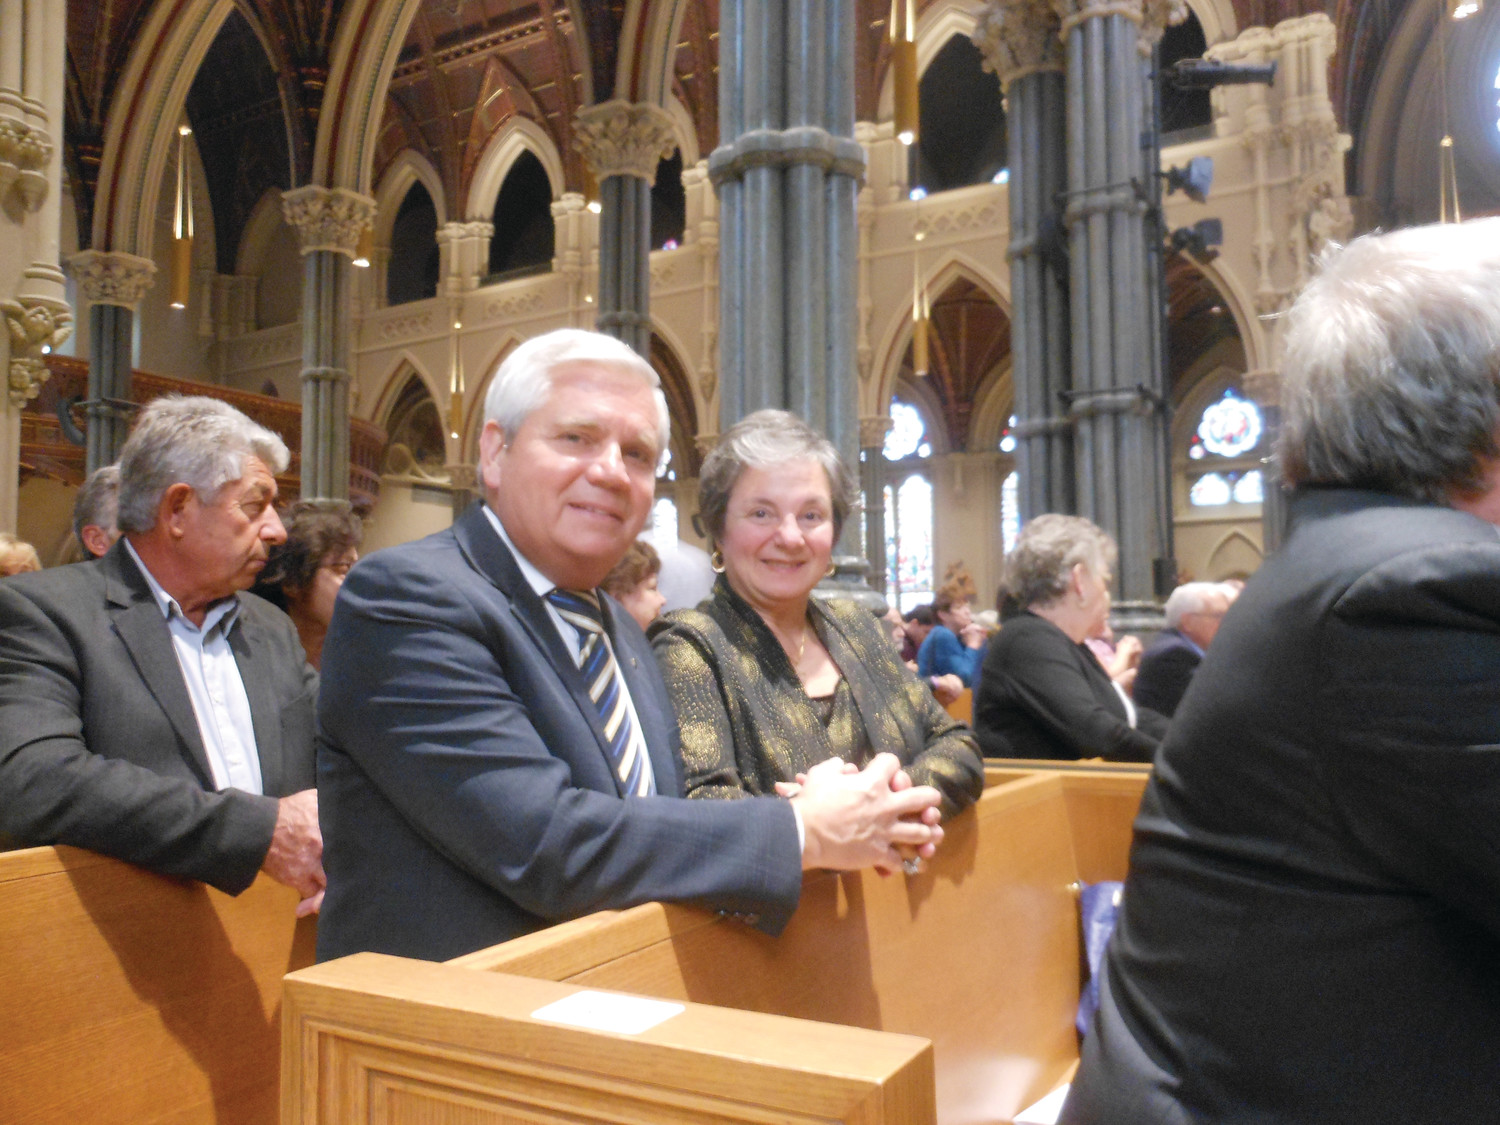 Richard and Susan Denningham of Immaculate Conception Church in Cranston hold hands during Mass.  The couple has been married for 40 years, though this is the first time they’ve attended the Anniversary Celebration. “We missed it on our 25th anniversary,” said Susan, “so we made sure we made it for our fortieth.” Richard expressed that participating in the ceremony was worth the wait: “it’s such a great chance to testify to your love in front of God.”